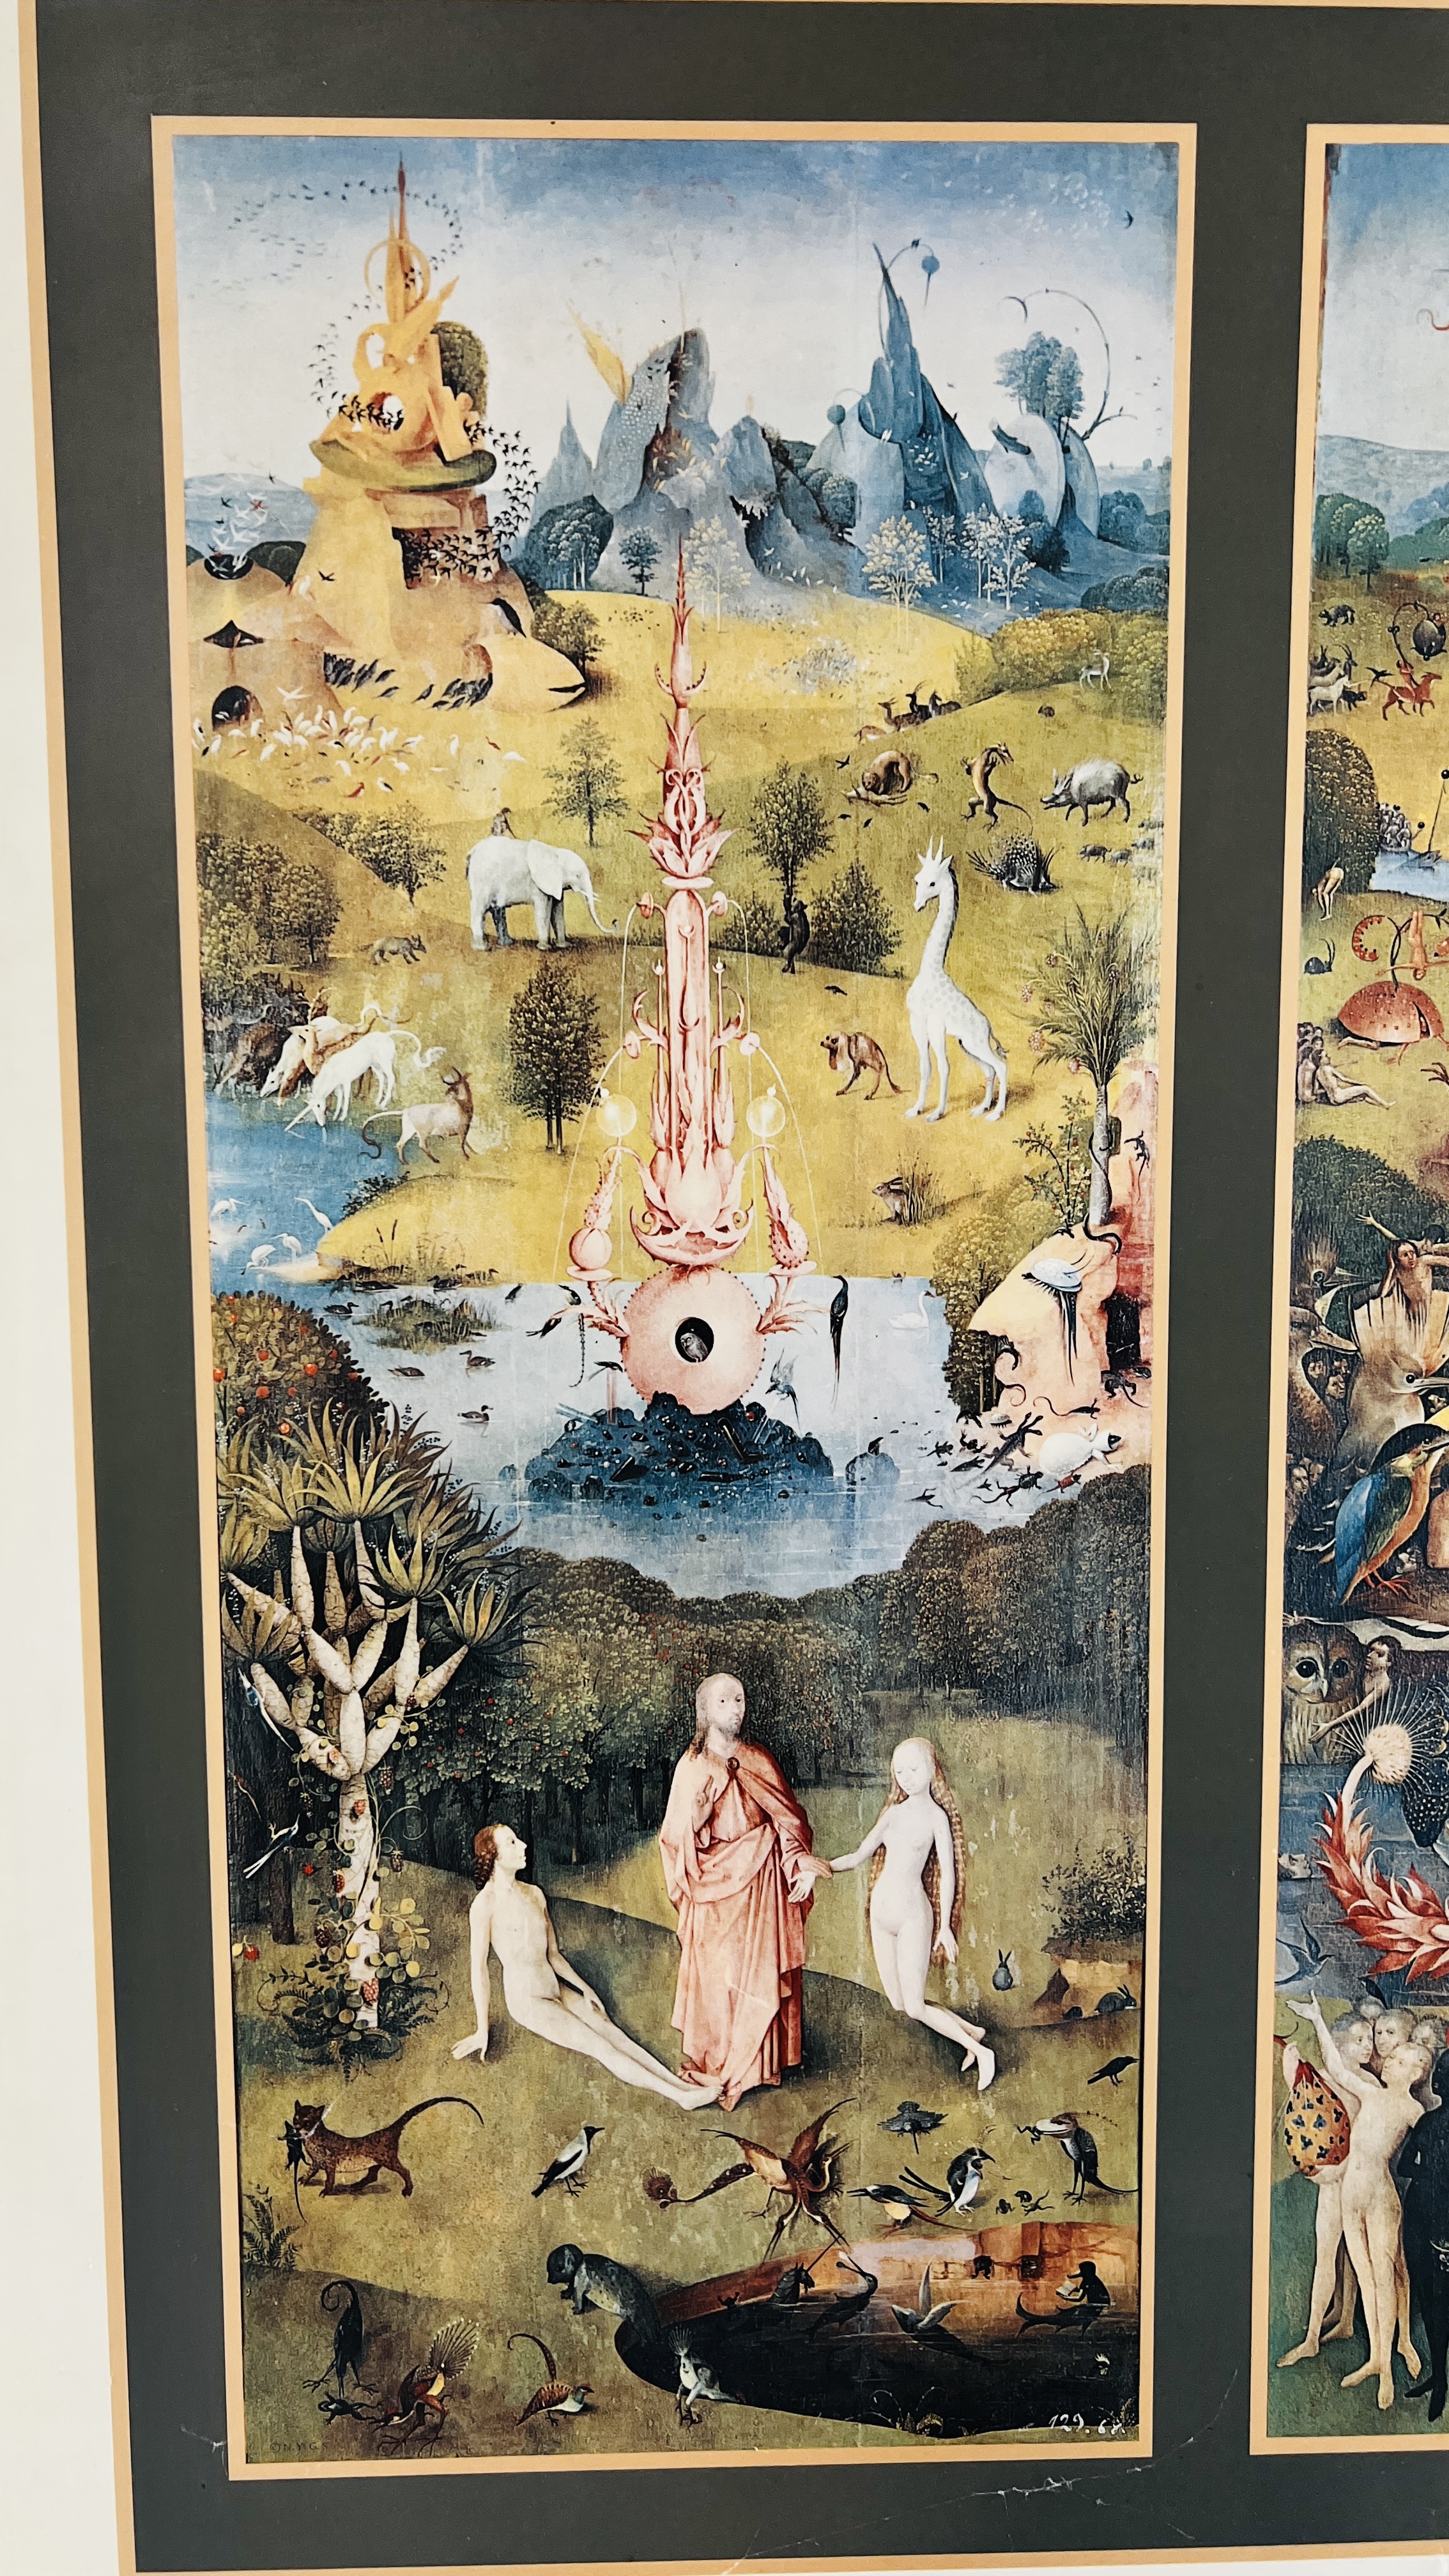 LARGE FRAMED HIERONYMUS BOSCH PRINT "THE GARDEN OF DELIGHTS" 60 X 106CM. - Image 2 of 6